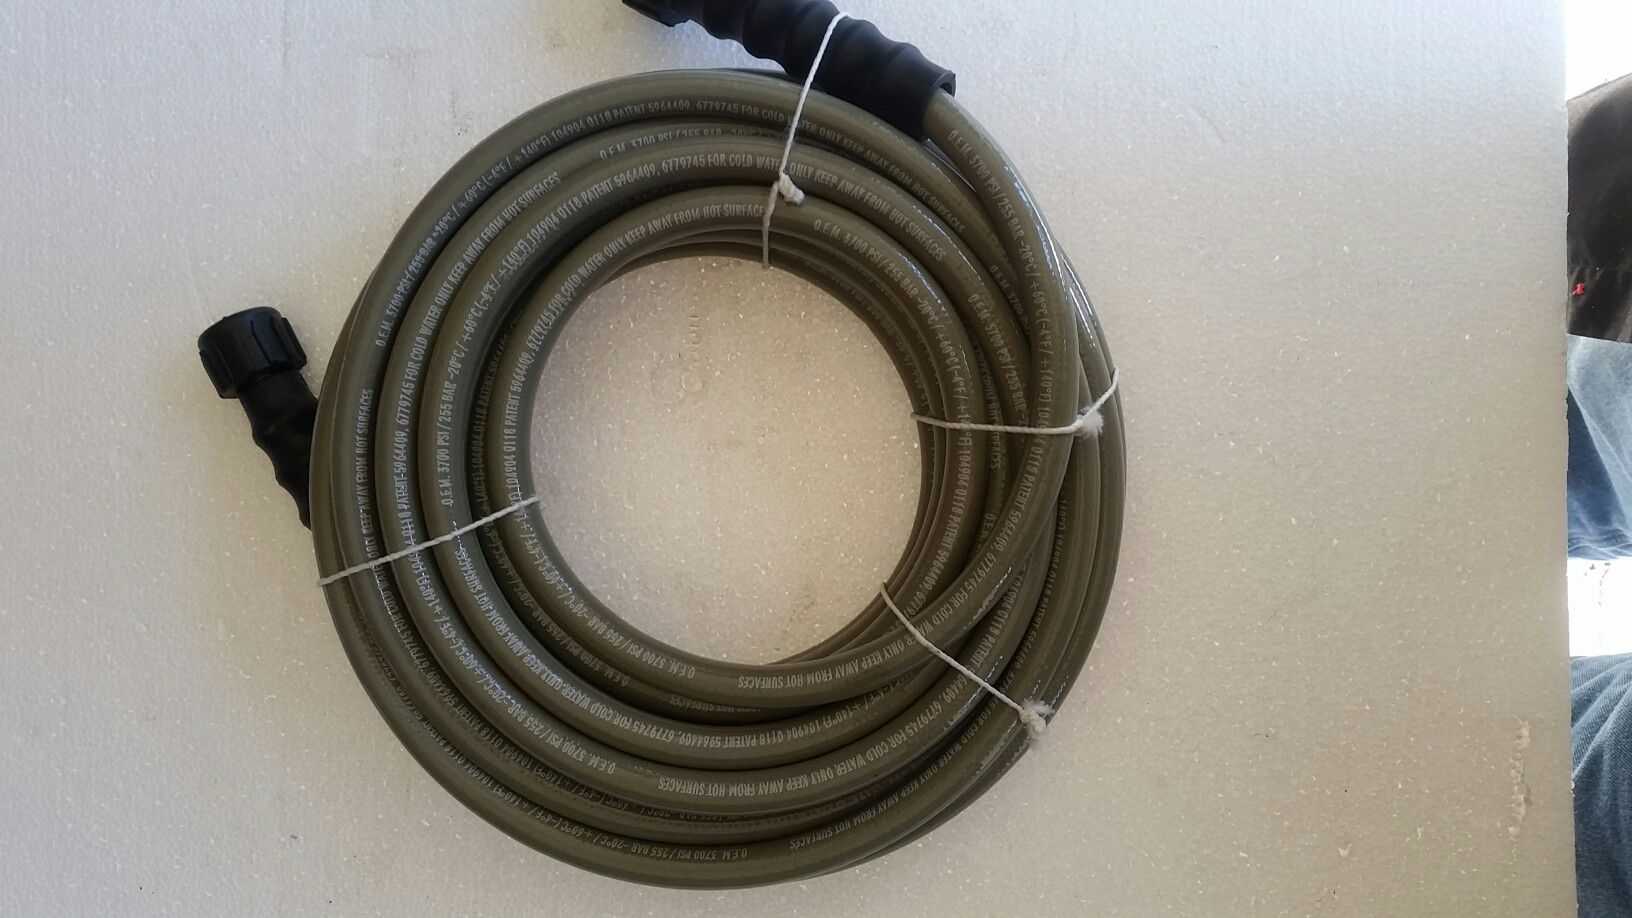 "EXTREME" 3700 PSI. HIGH PRESSURE HOSE FOR COMMERCIAL POWER PRESSURE WASHERS BRAND NEW $50.